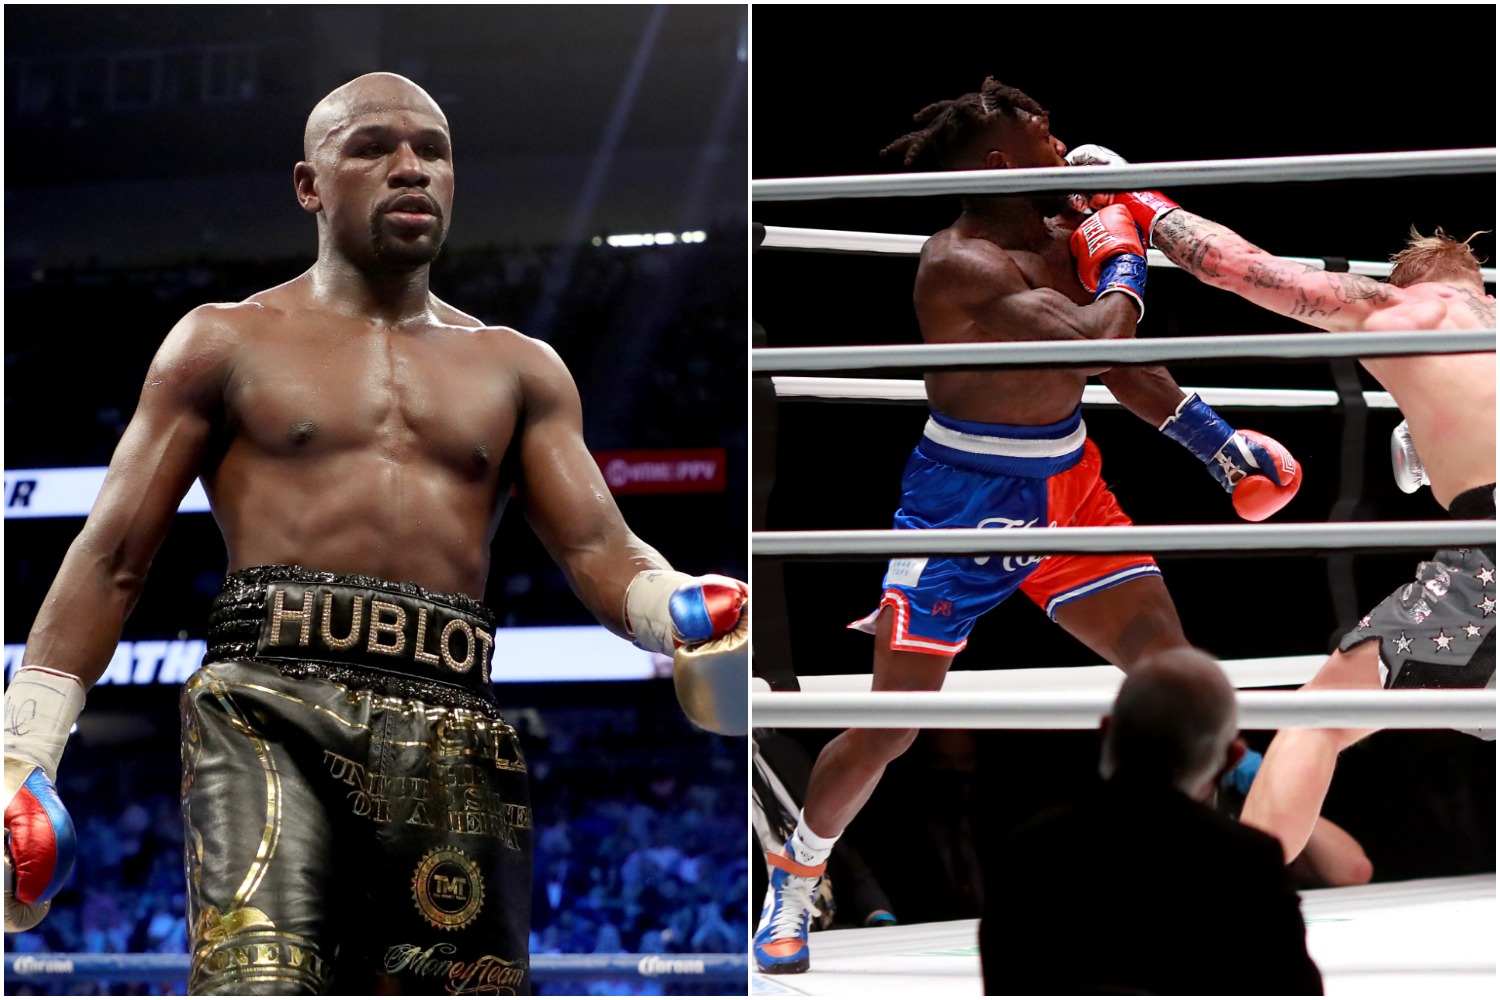 Floyd Mayweather sent a stern message to the Black community about mocking Nate Robinson.